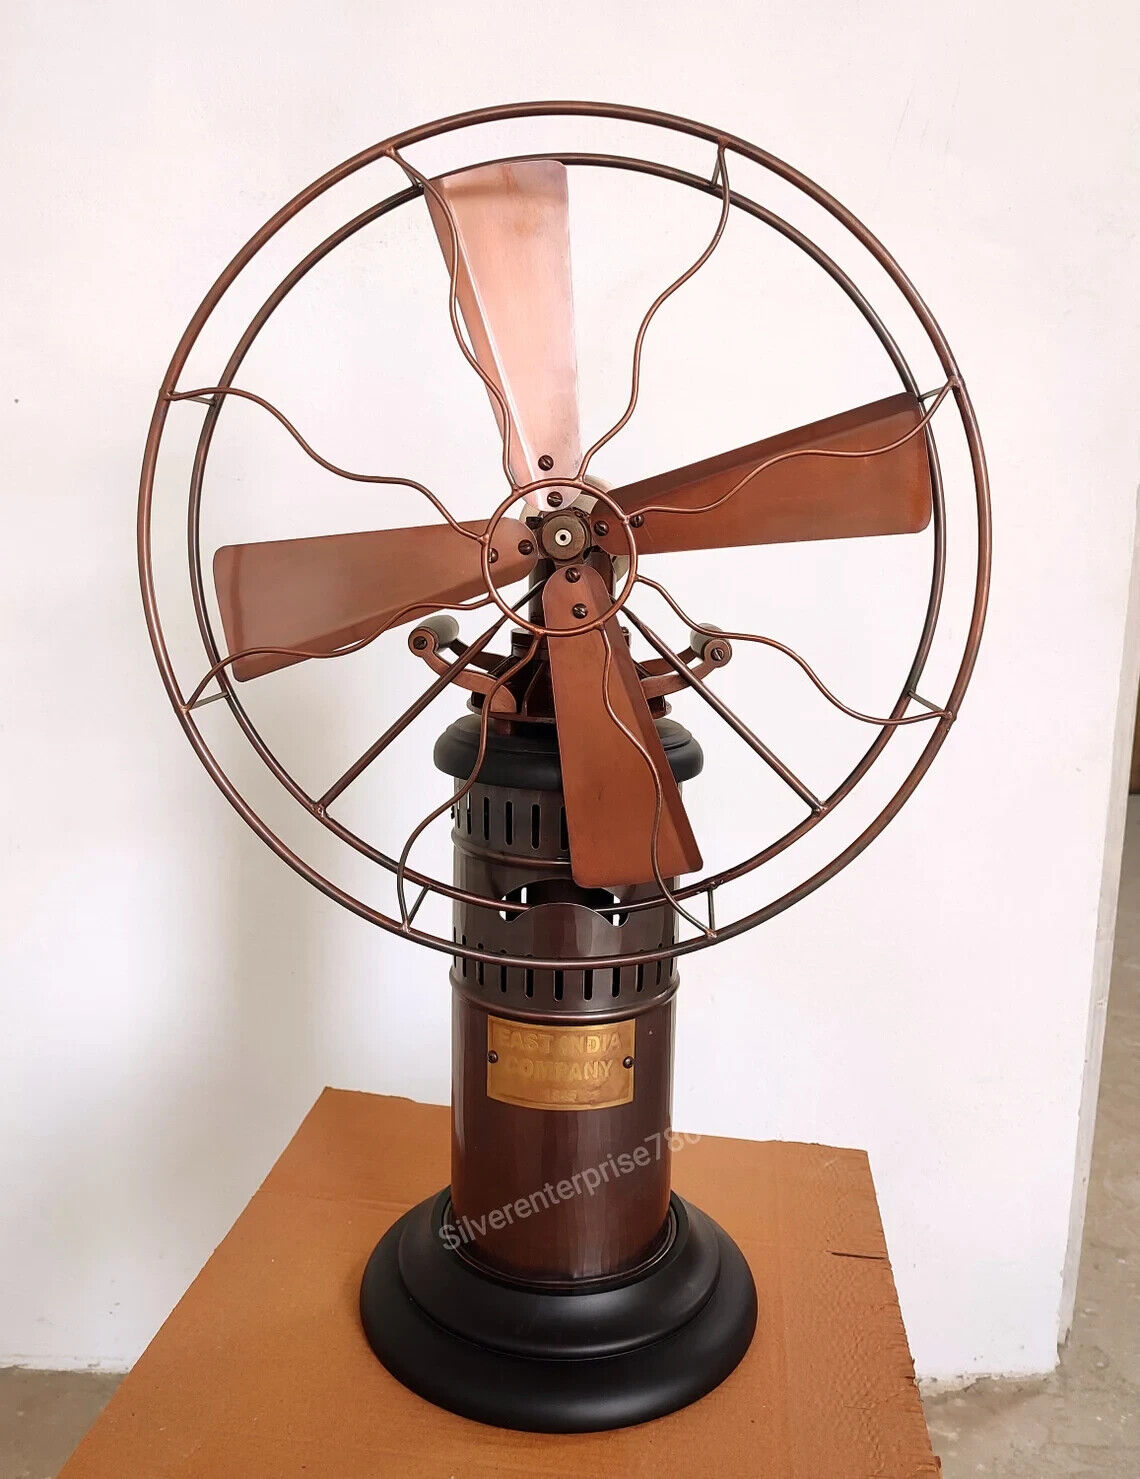 Vintage Steam Operated Antique Kerosene oil Fan Working Collectibles Museum